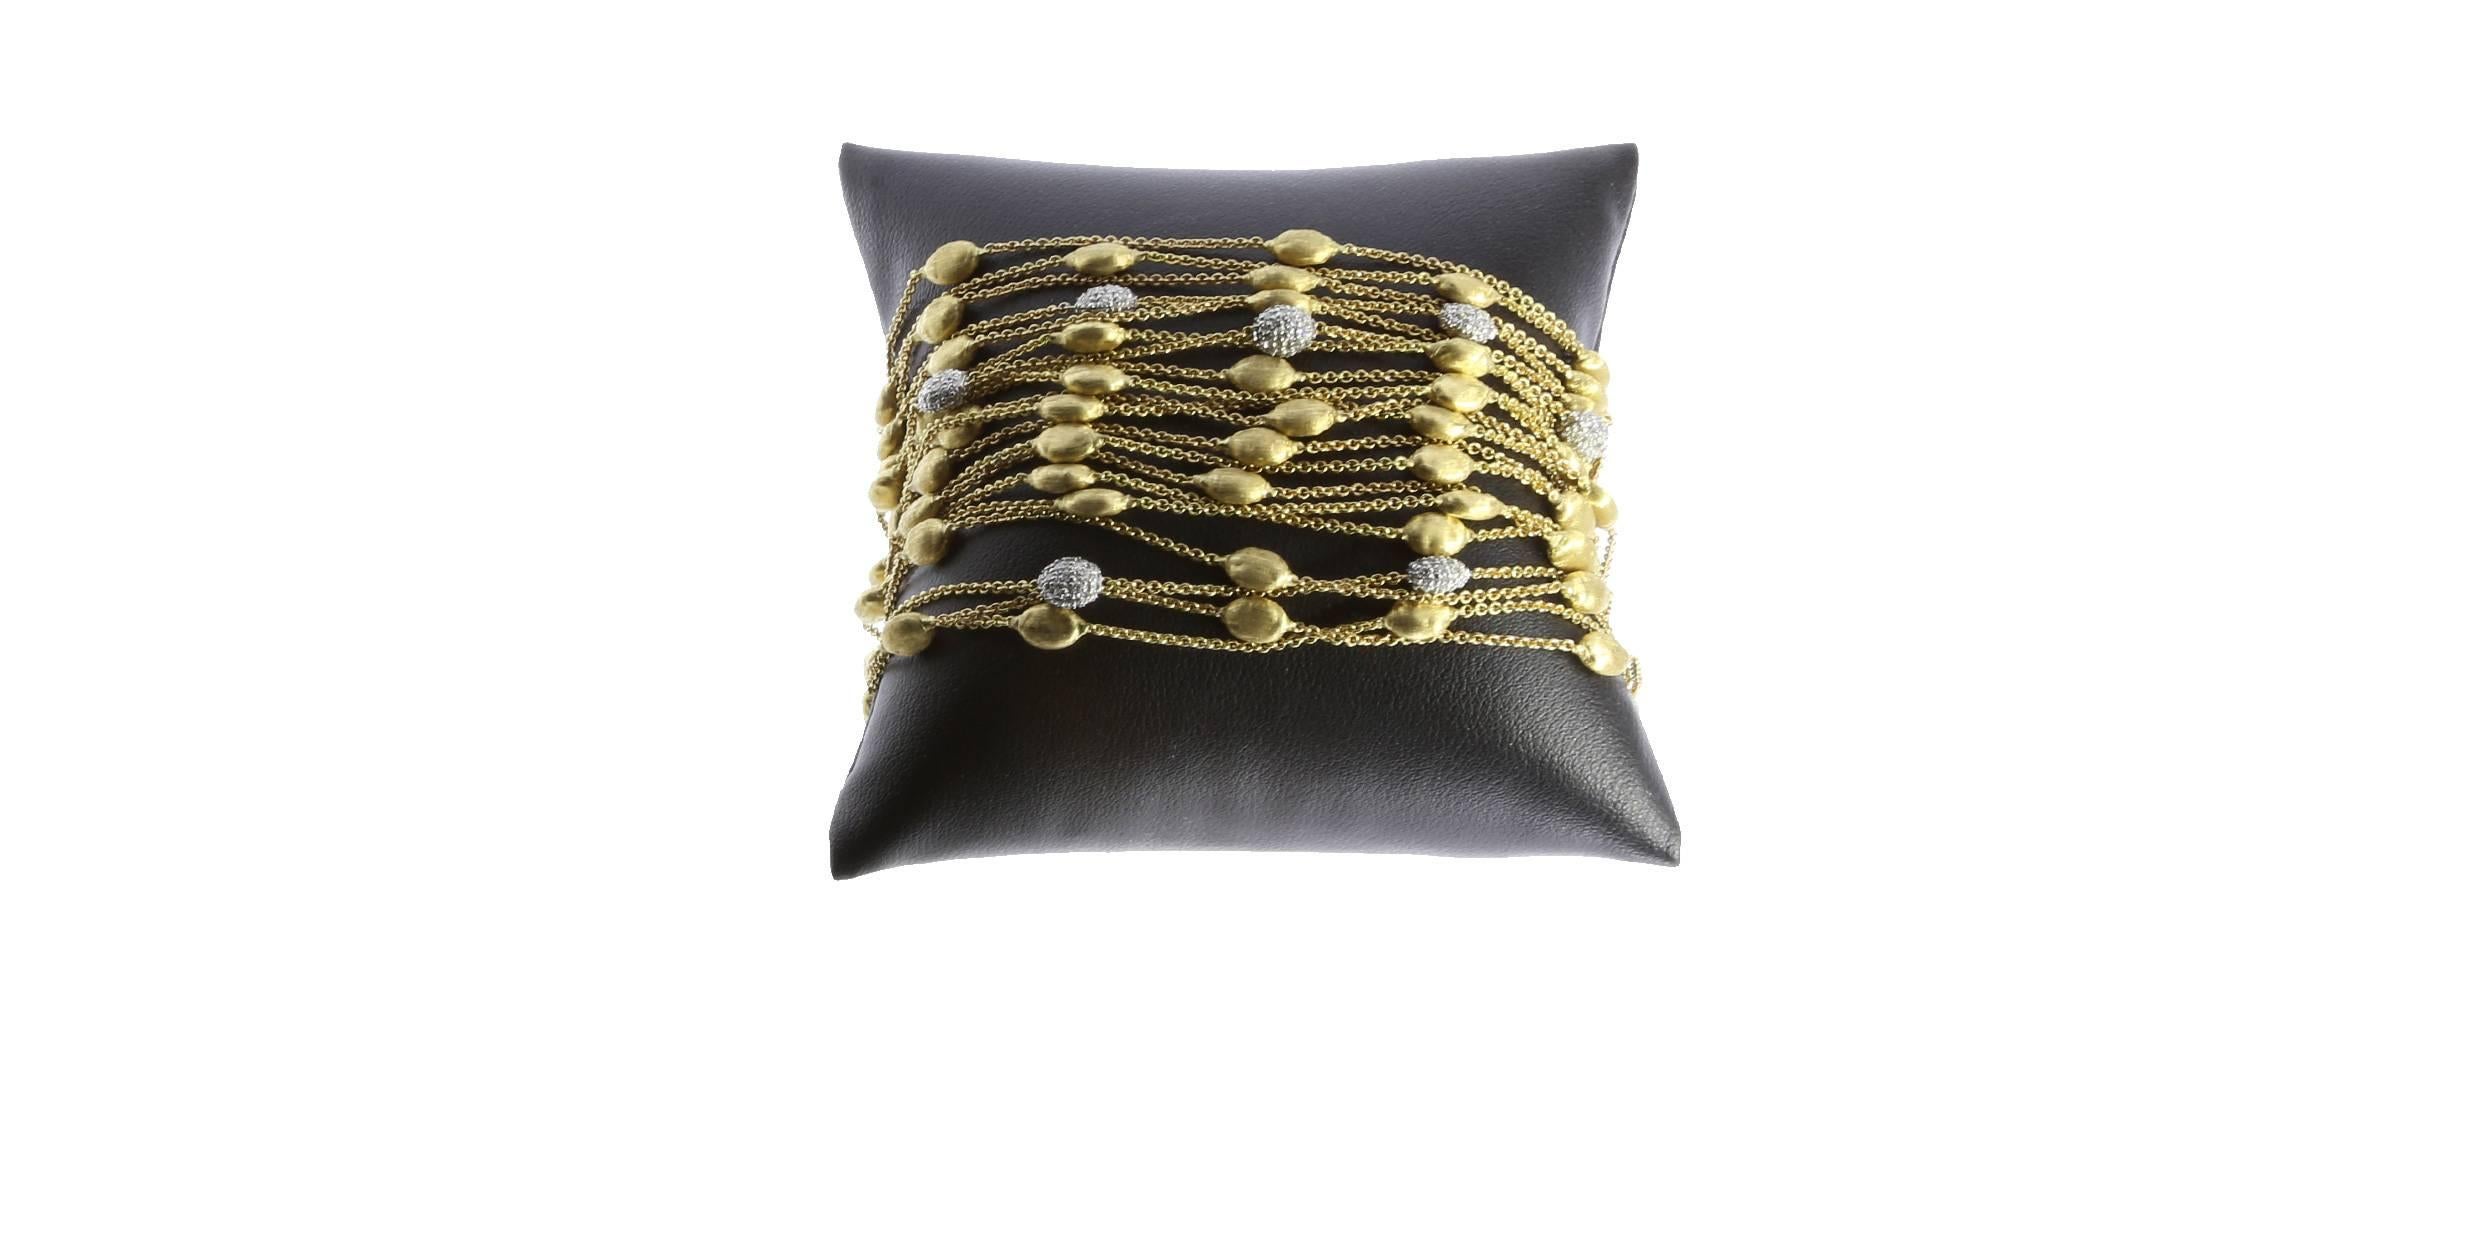 Your look will get a dramatic touch with this Marco Bicego 18 karat yellow gold 20 strand diamond bracelet from the Siviglia collection. Twenty gold strands of link bracelet are showered with yellow gold oval shapes that sport the textured finish of